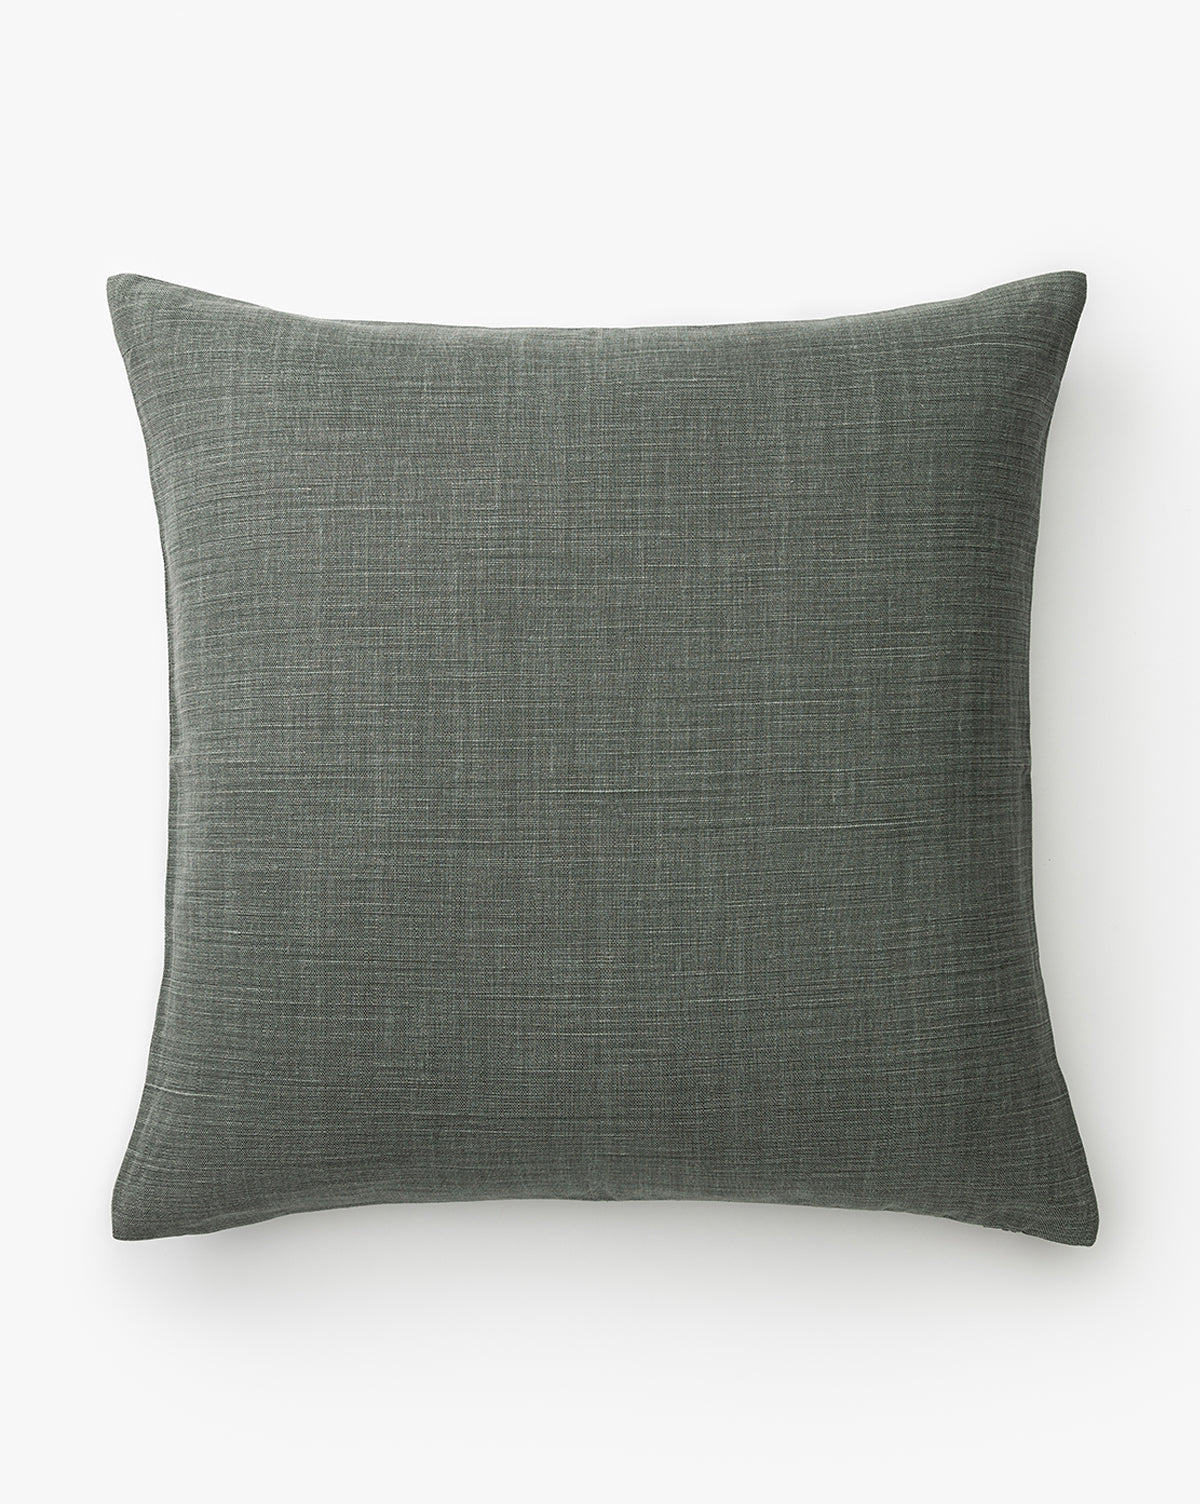 Libeco, Talia Brushed Linen Pillow Cover